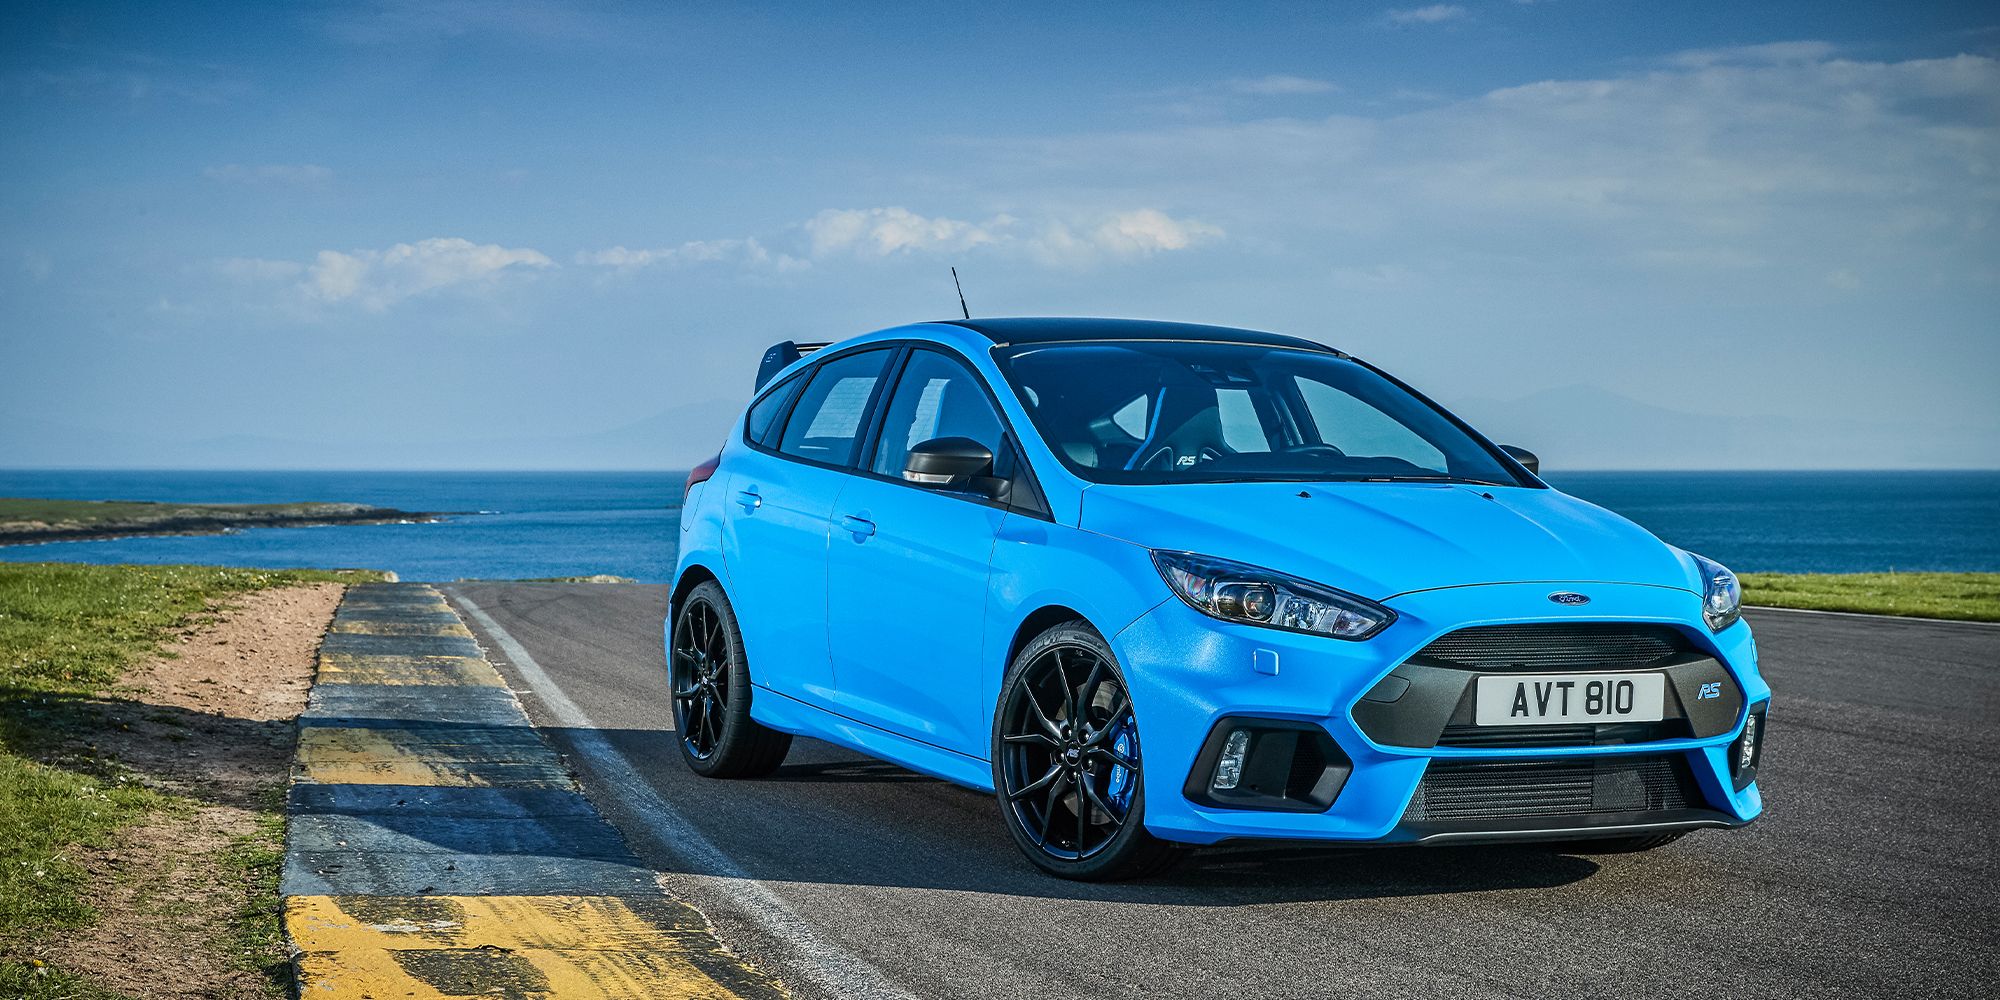 The front of the Focus RS Mk3 Nitrous Blue UK Hot Hatch